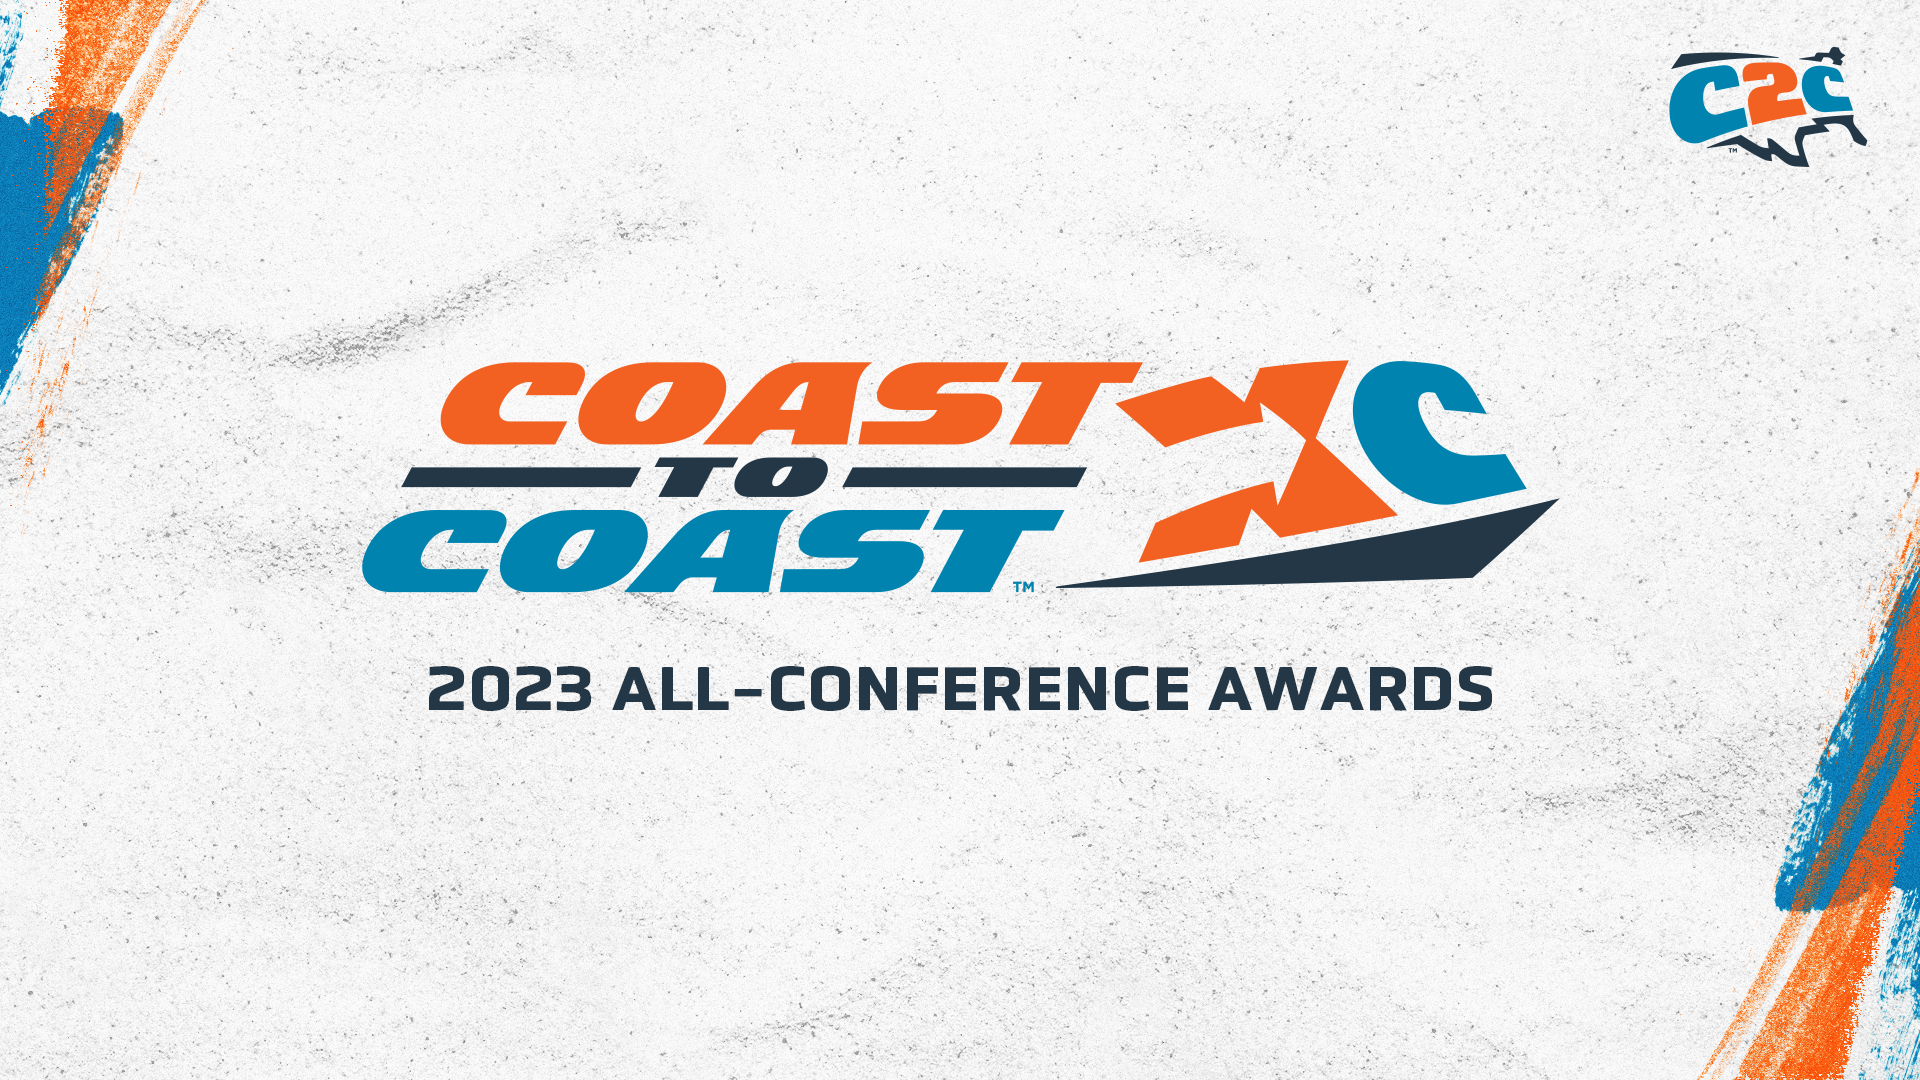 2023 C2C Men's and Women's Cross Country Awards Announced